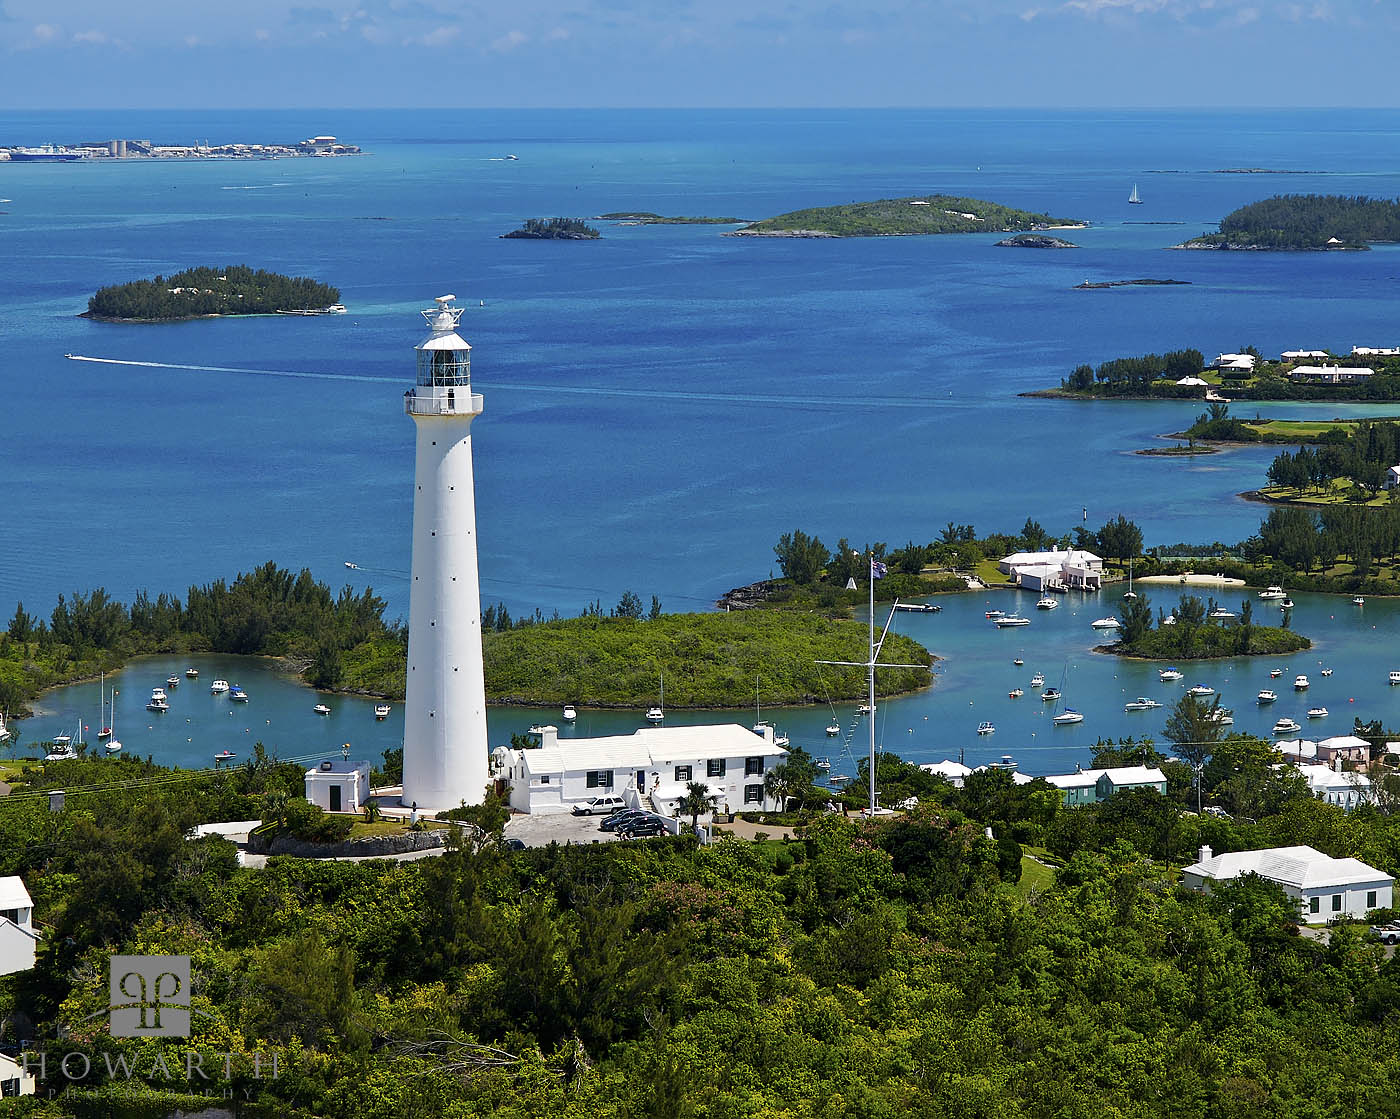 Gibbs Hill Lighthouse with Dockyard in the background